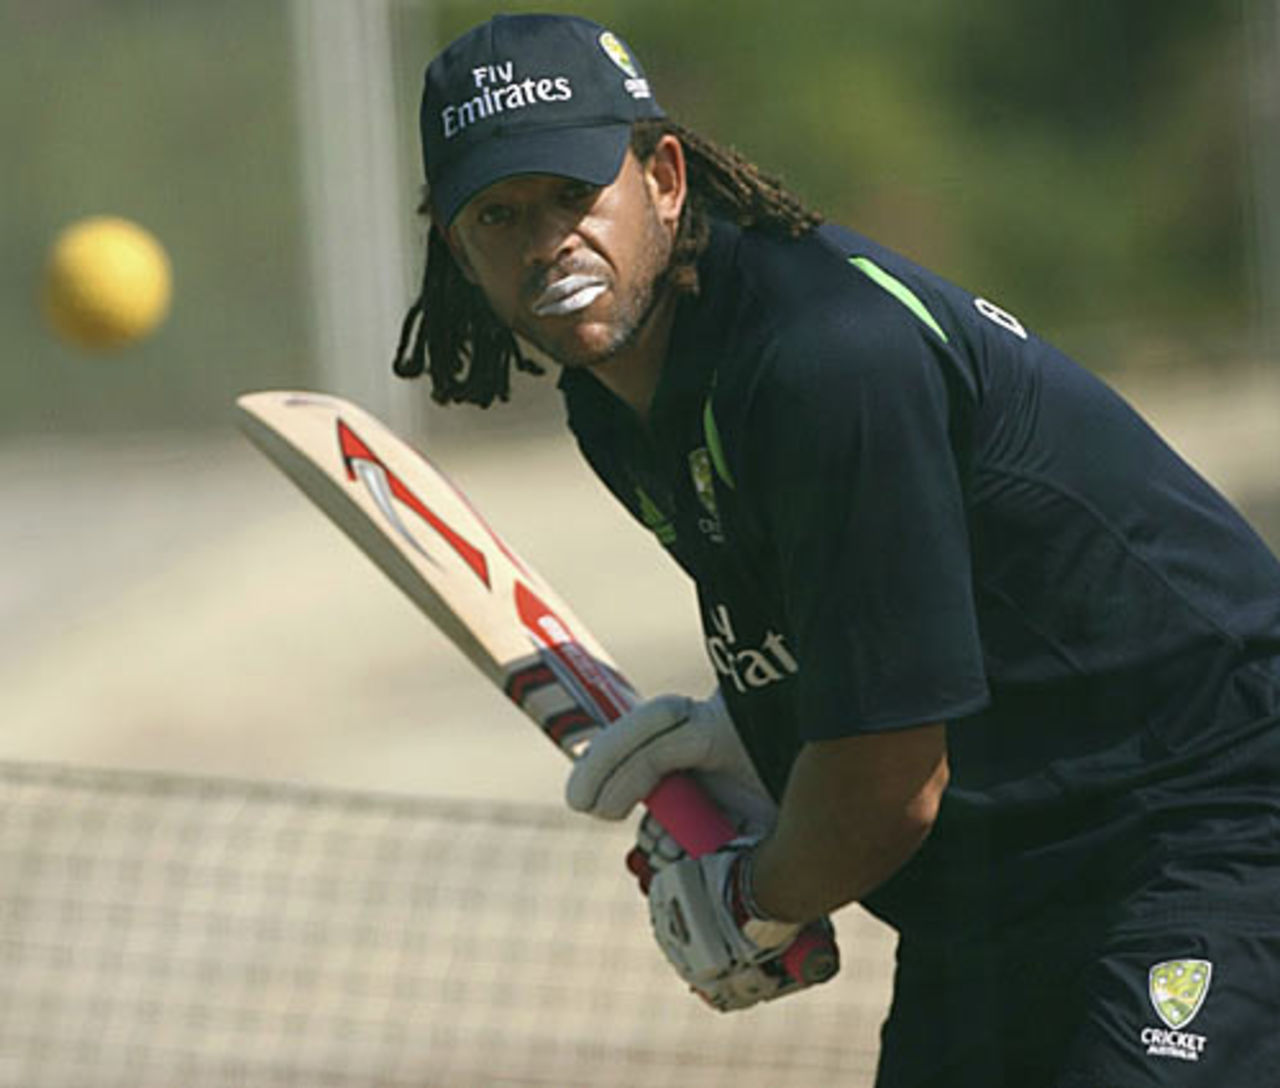 Andrew Symonds focuses his concentration during a net session, Stubbs Cricket Ground, St Vincent, March 5, 2007